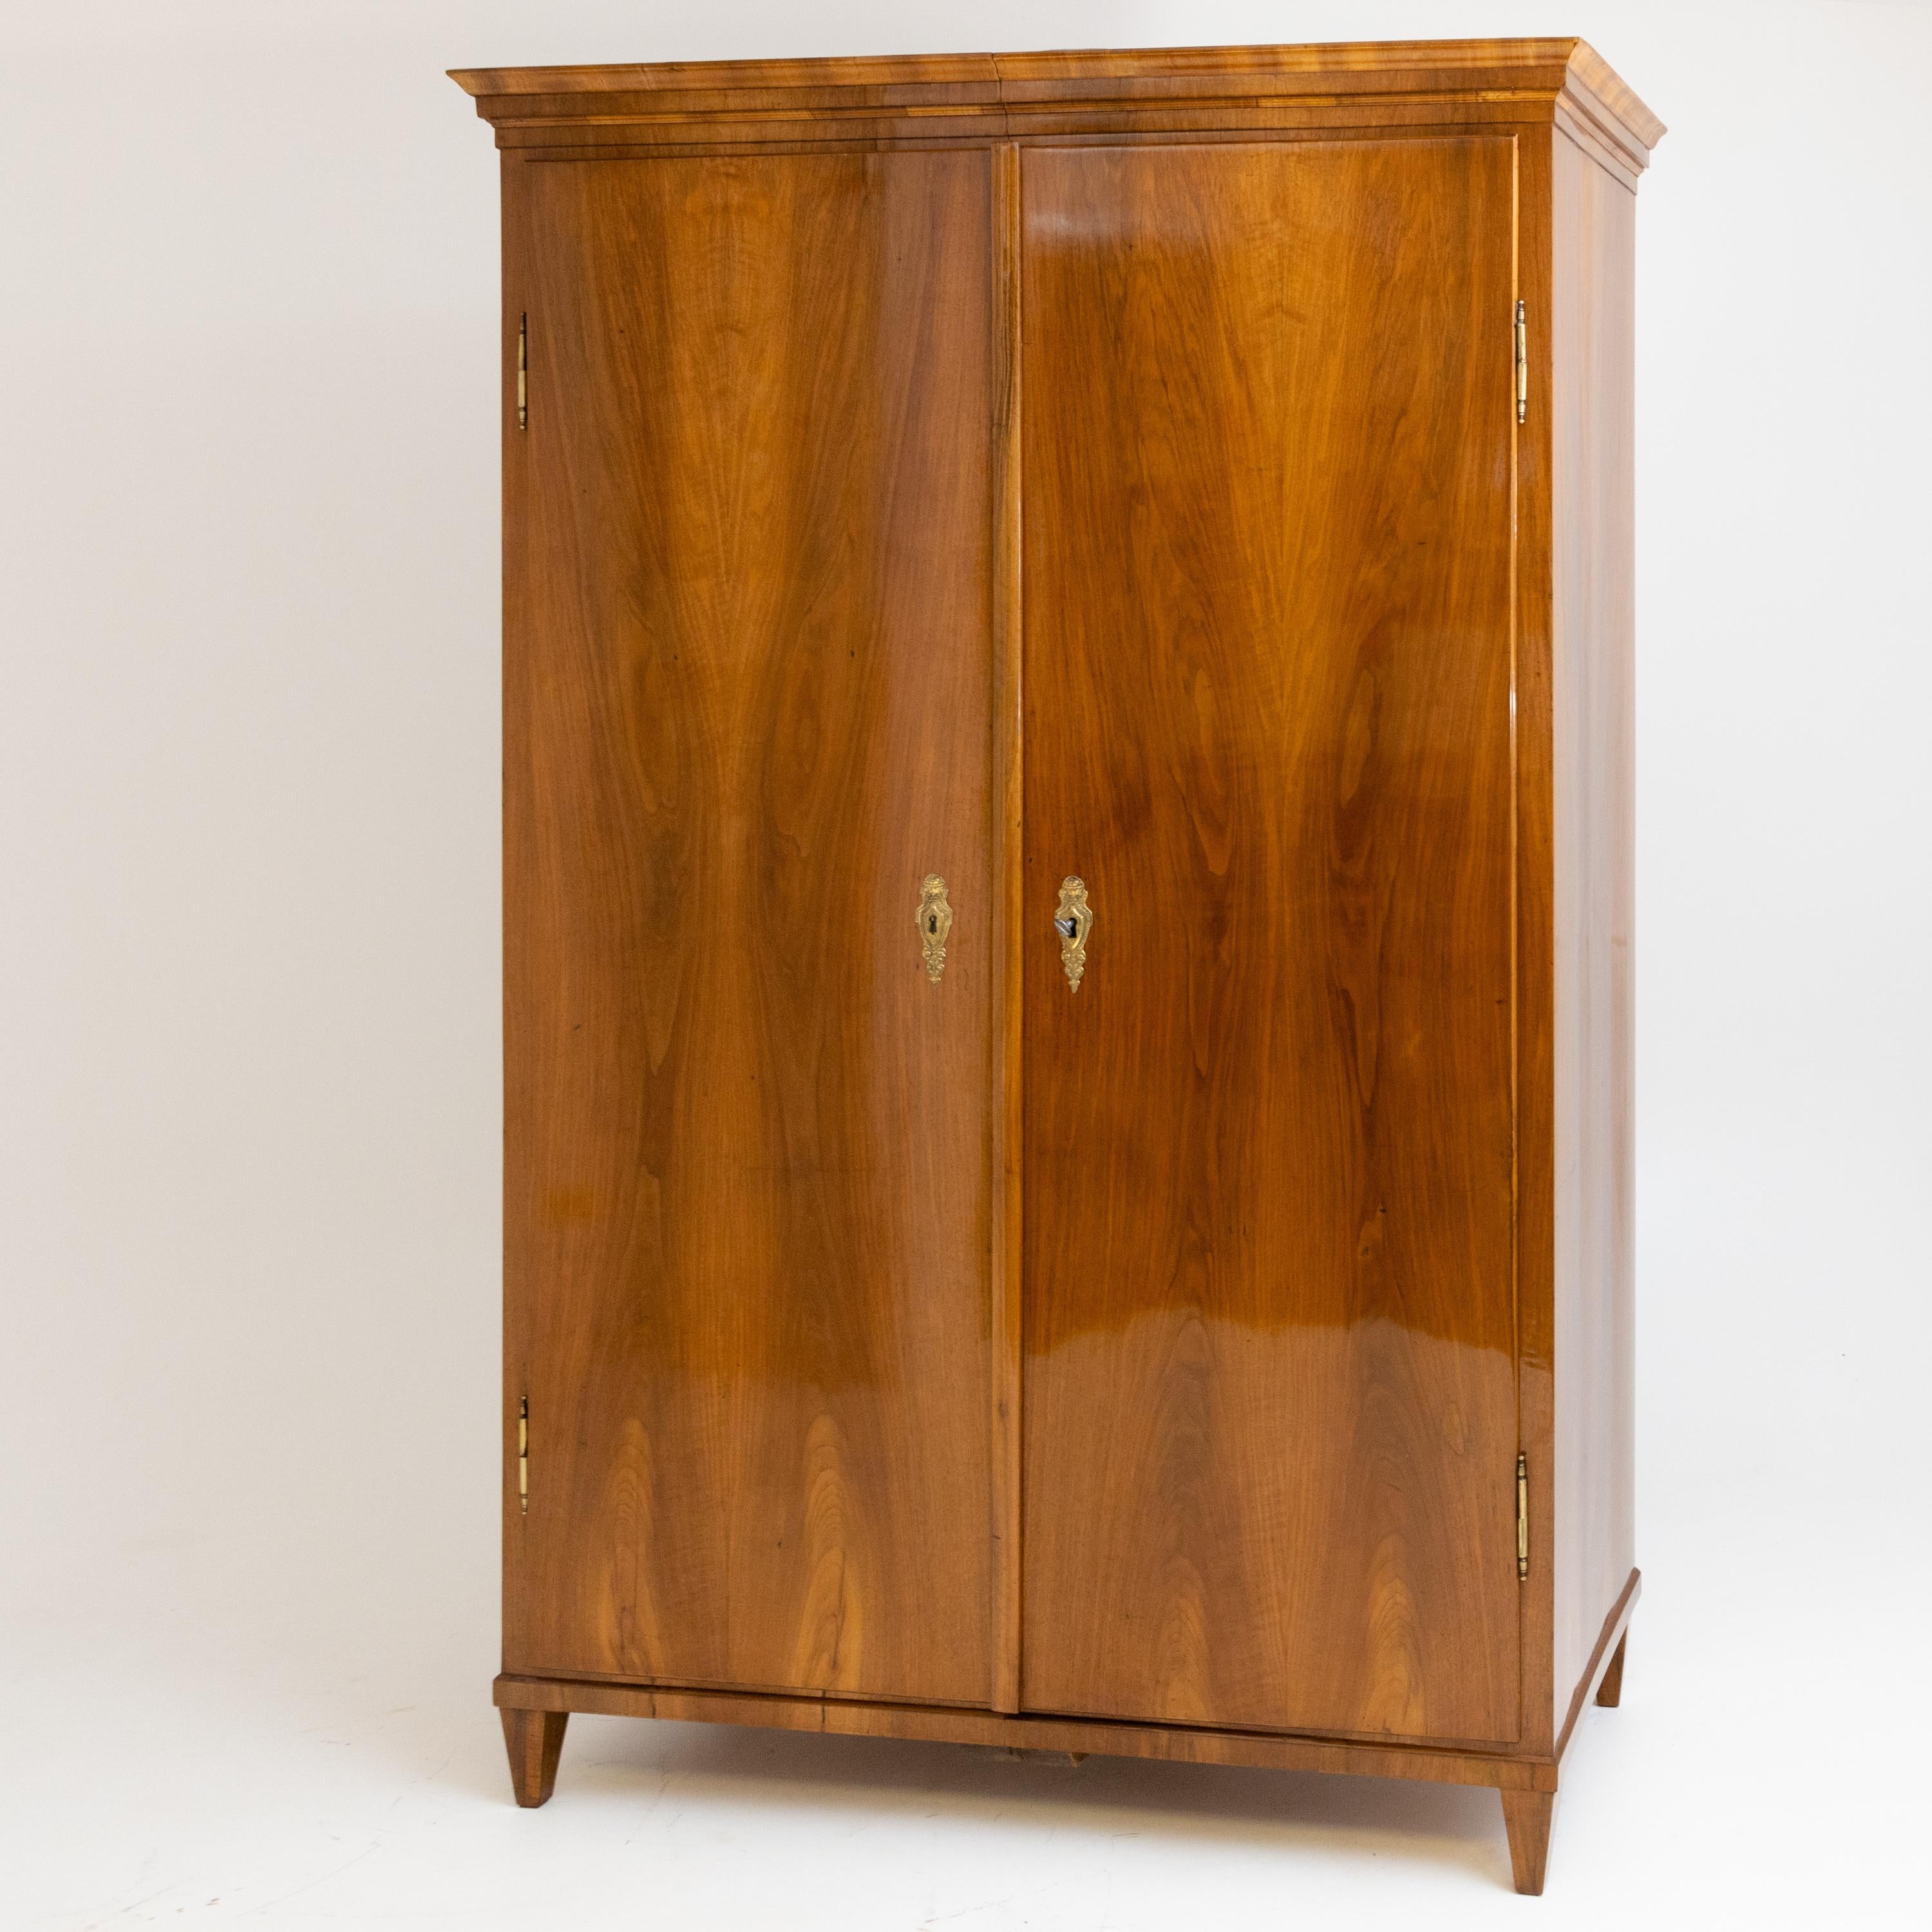 Two-door Biedermeier cabinet in walnut veneered, standing on low tapered legs. The smooth, straight-lined body ends with a profiled cornice. The cabinet has been expertly prepared and hand-polished.